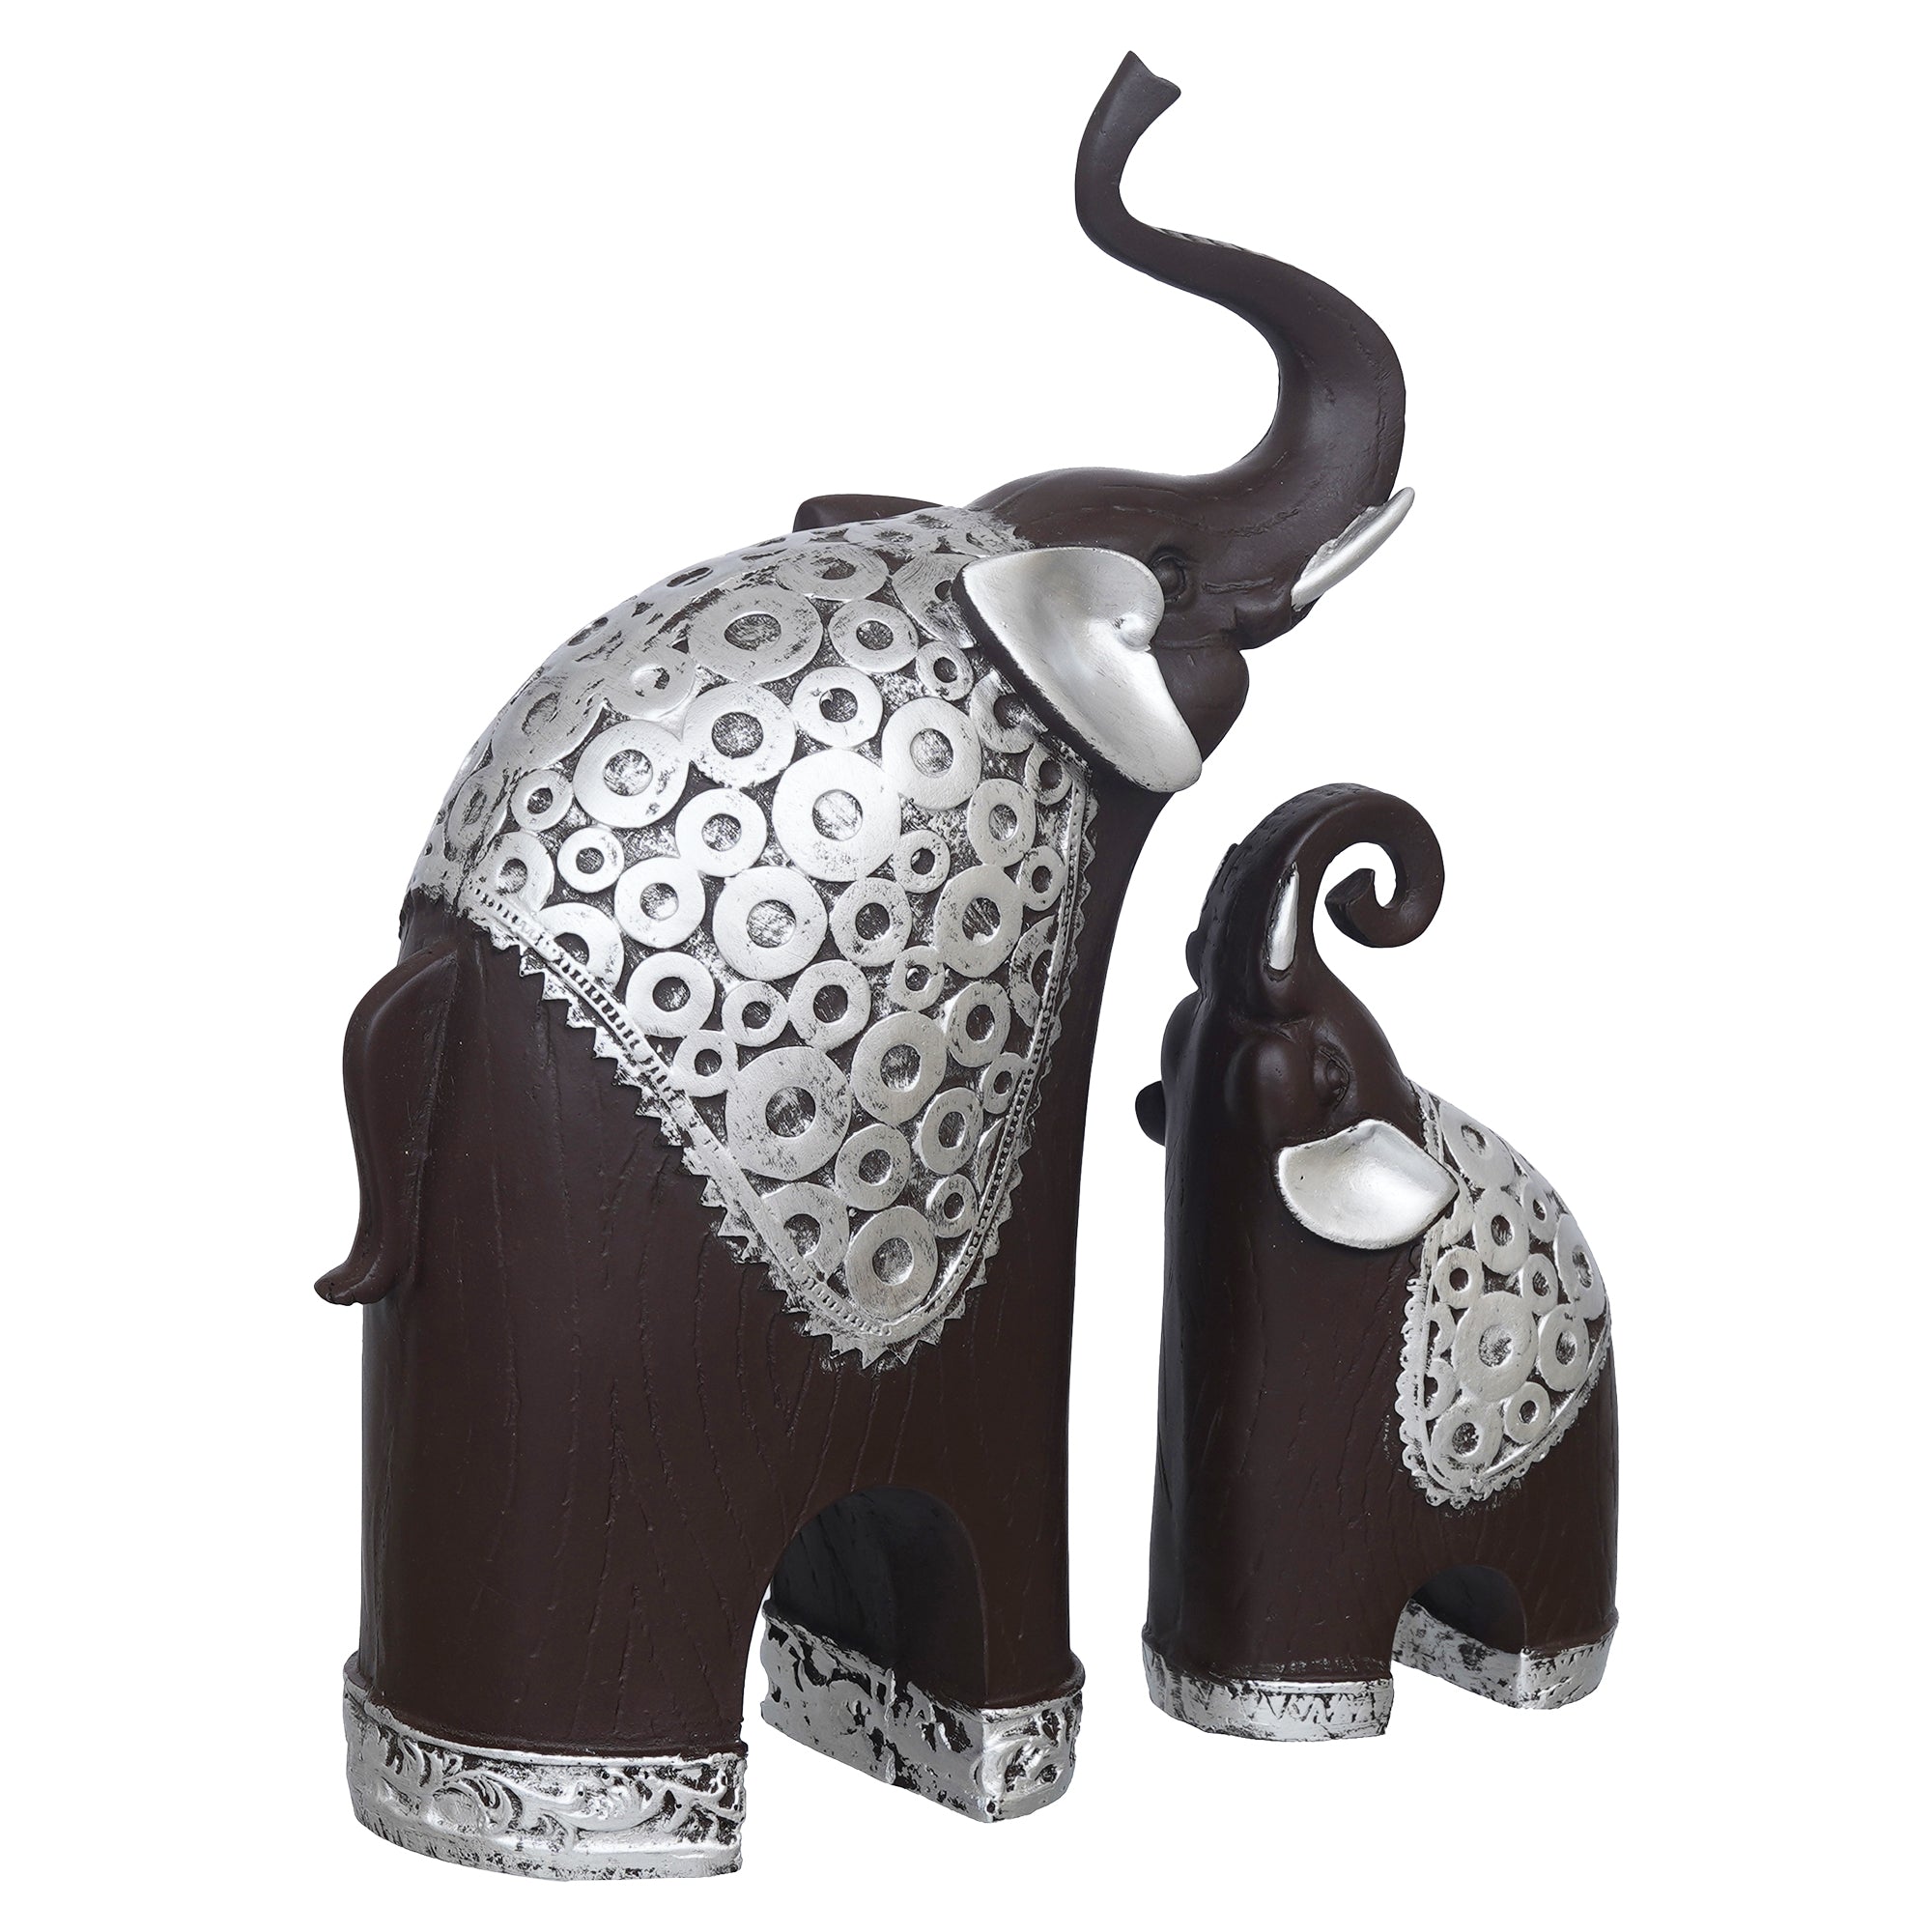 eCraftIndia Set Of 2 Black Silver Polyresin Trunk Up Elephant Statues Animal Figurines Showpieces 6